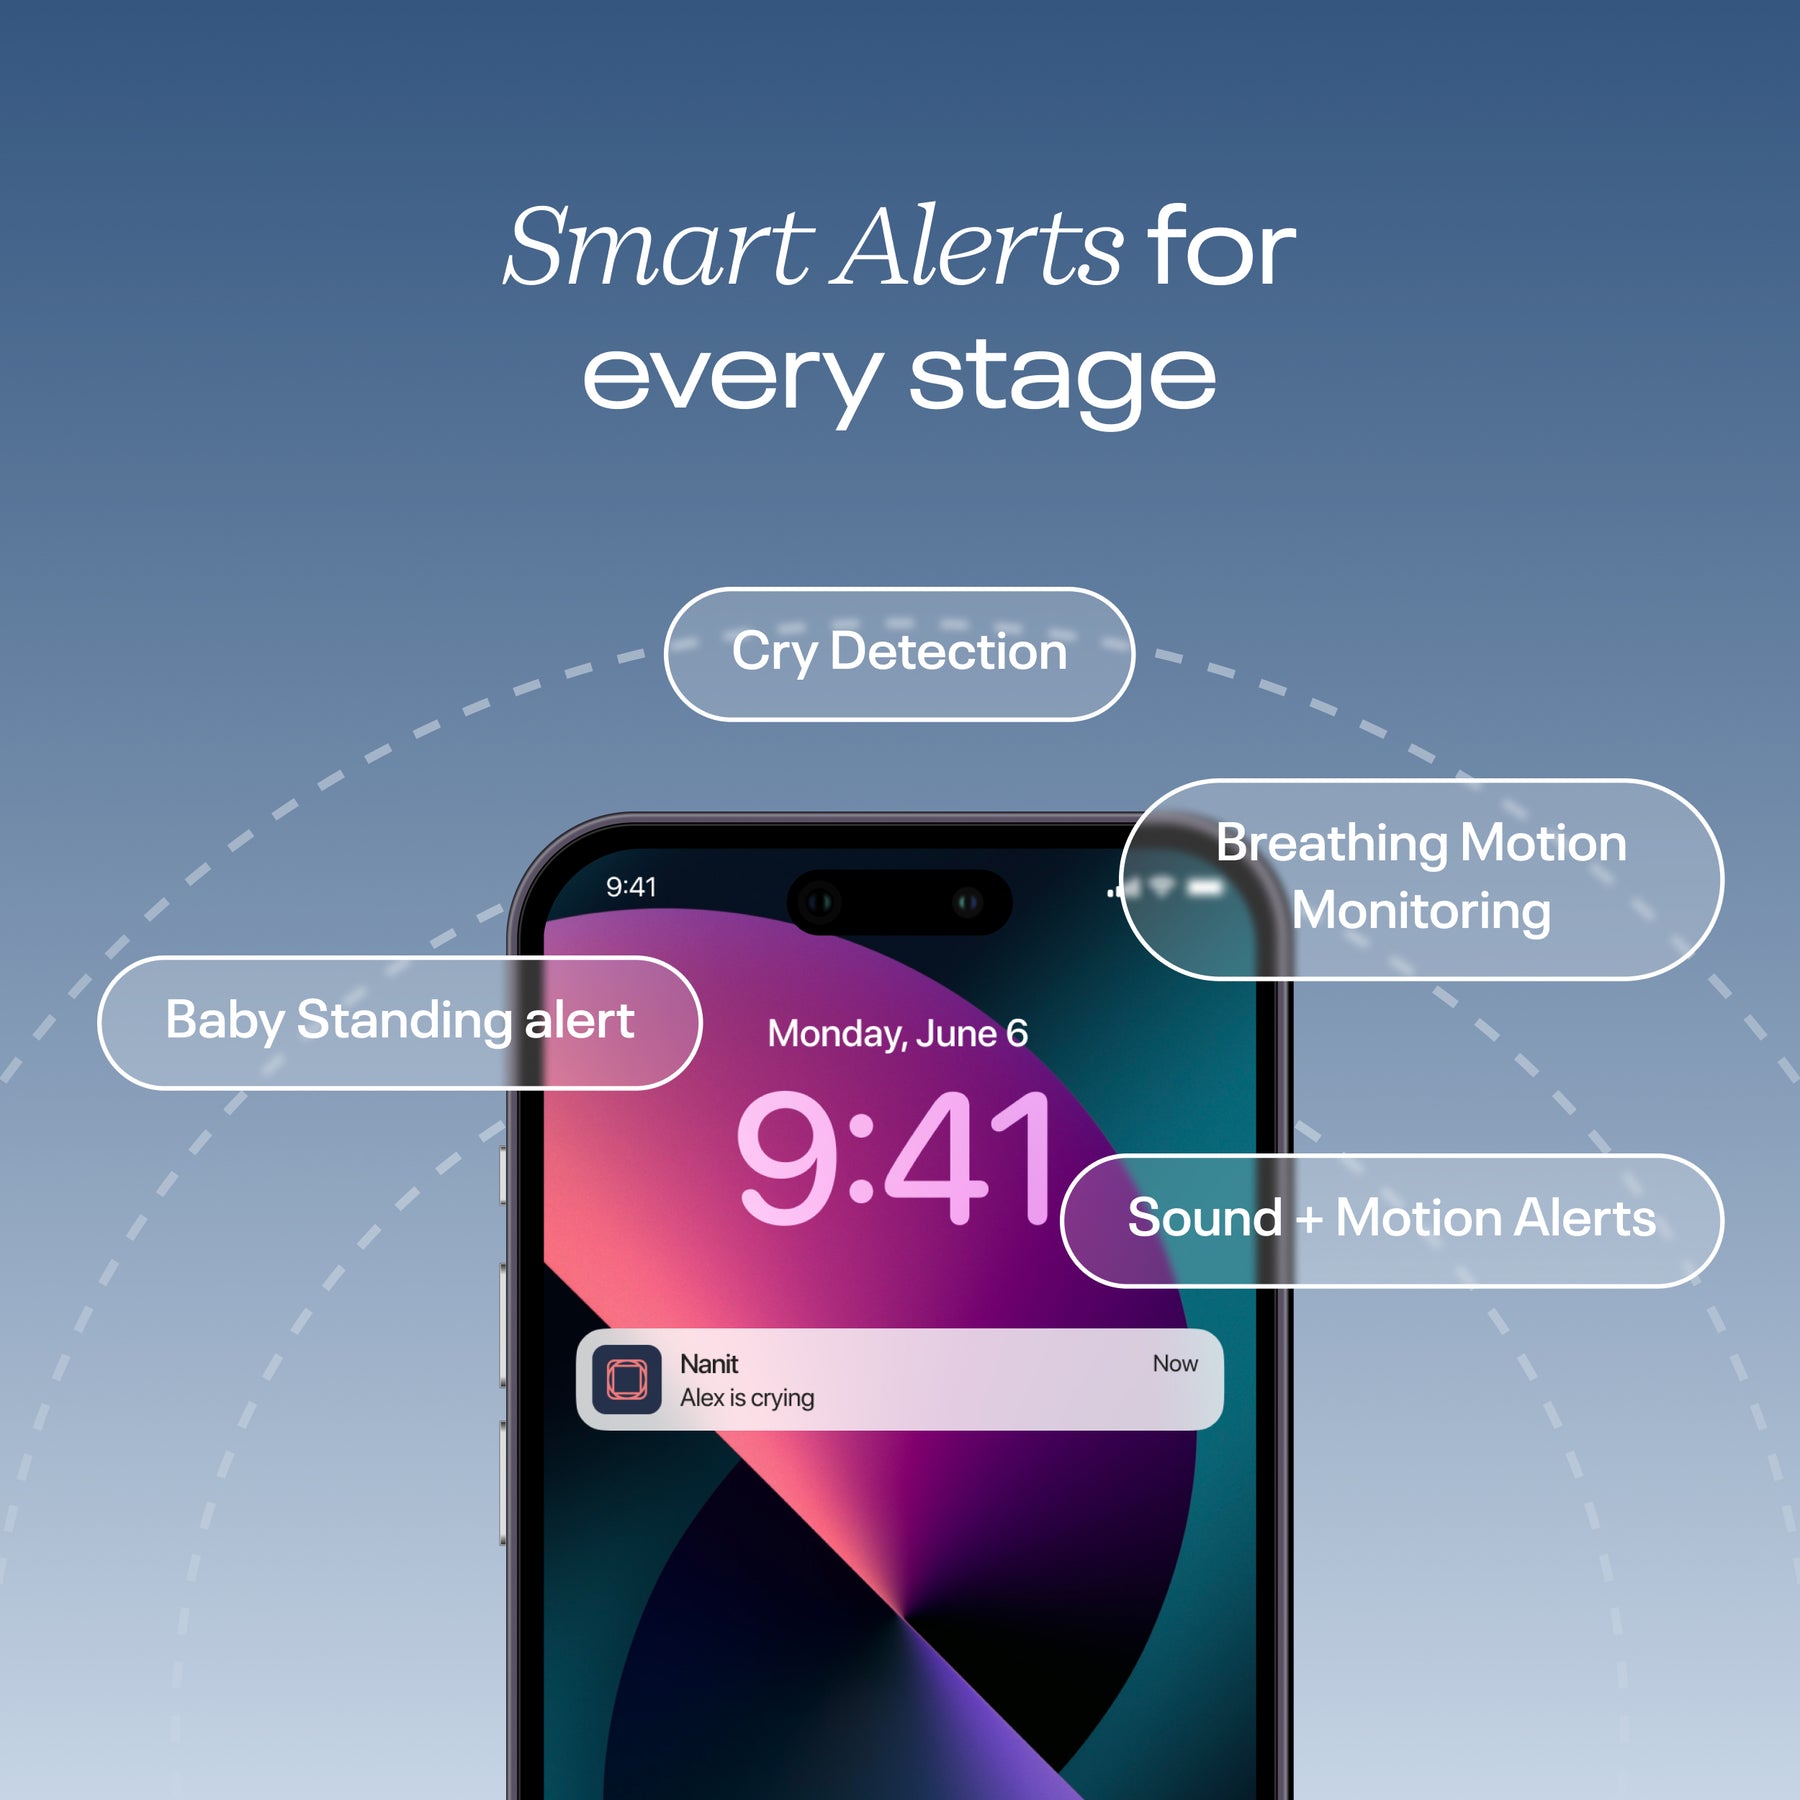 smart alerts for every stage - baby standing alert, cry detection, breathing motion monitoring, and sound + motion alerts